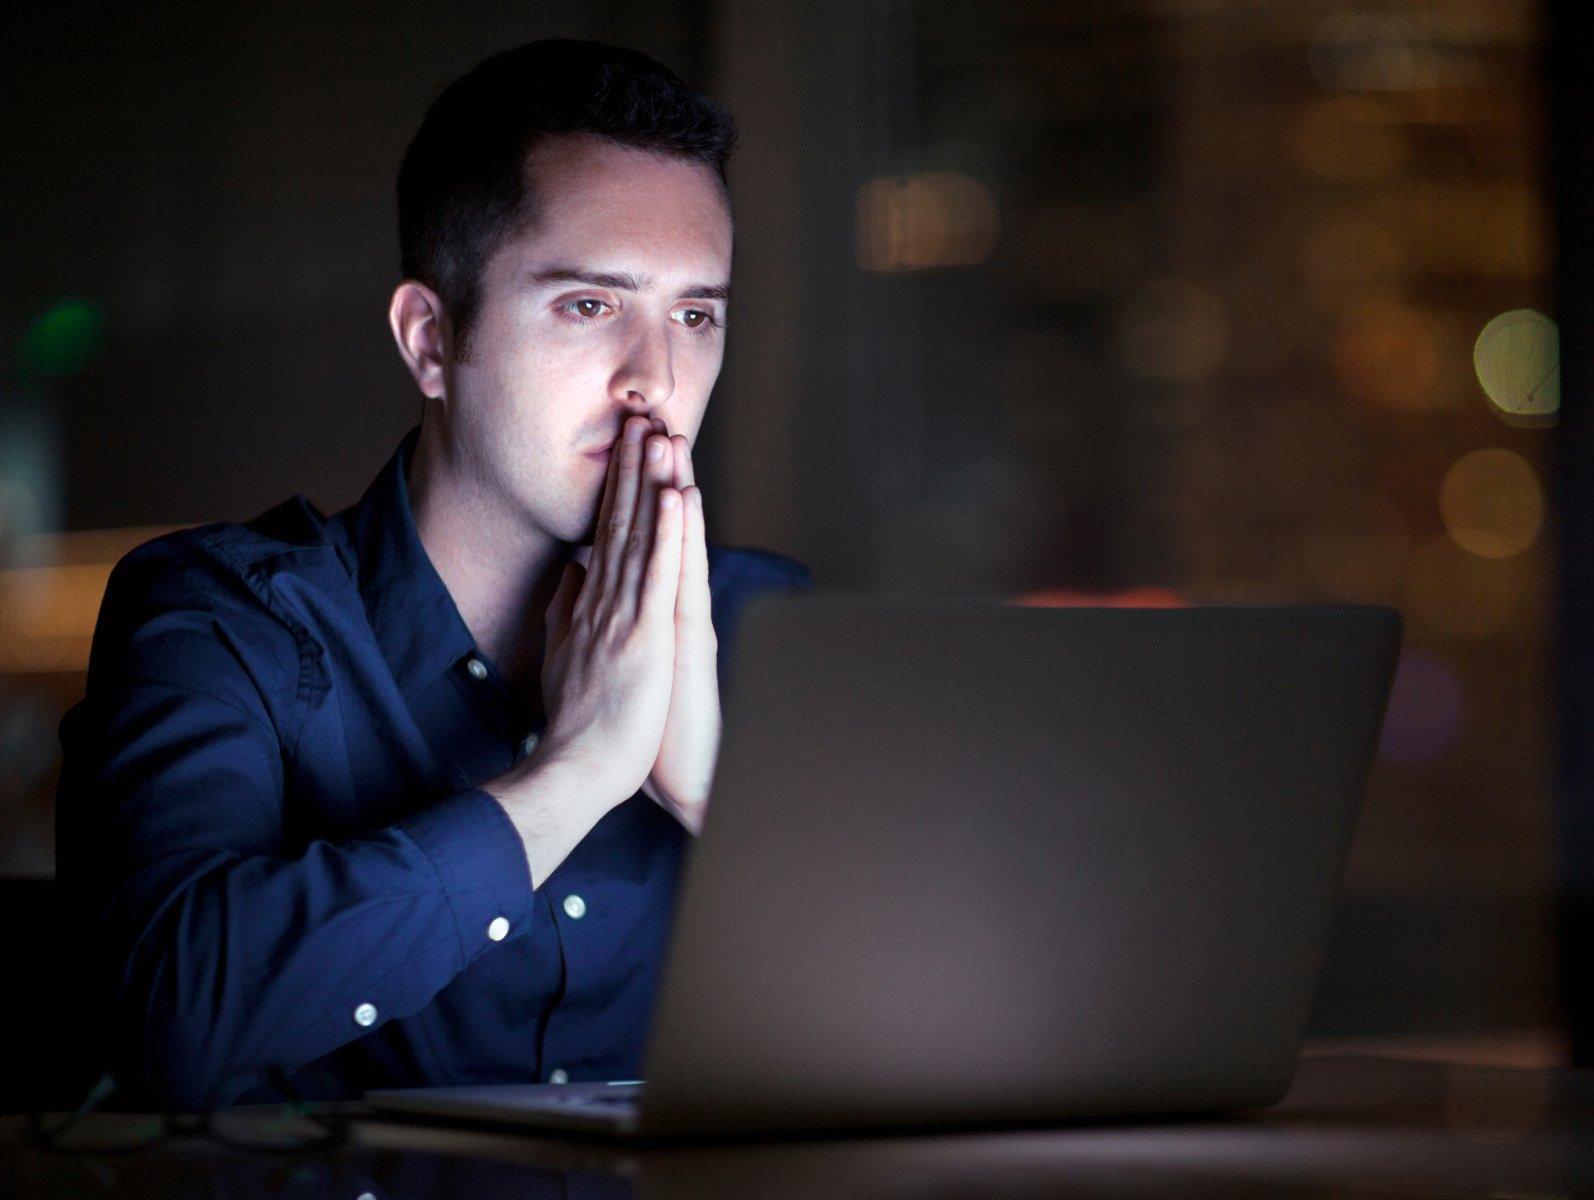 man in front of laptop with praying gesture